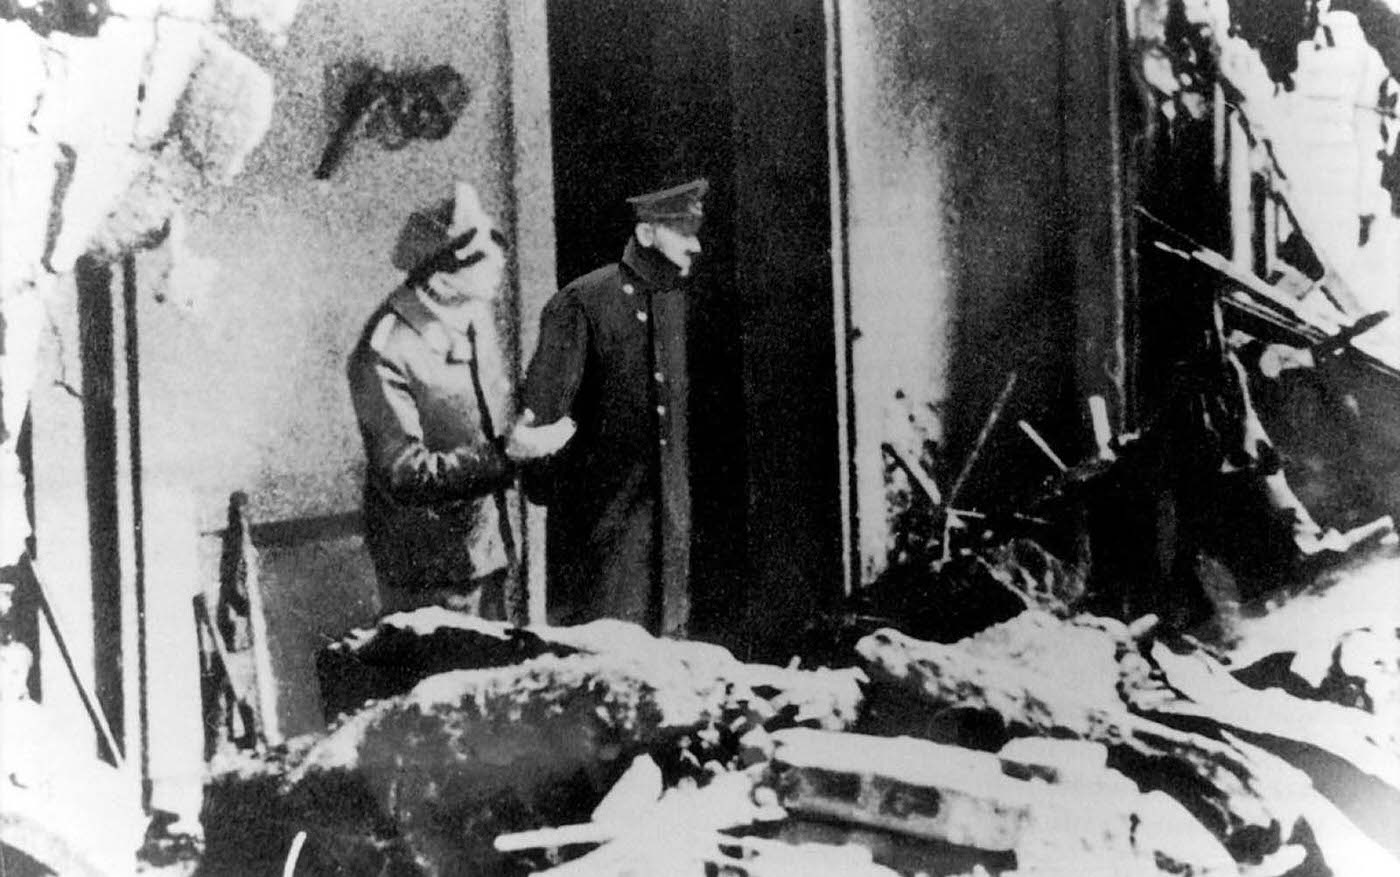 The End of an Era: The Last Known Photo of Adolf Hitler Before His Suicide